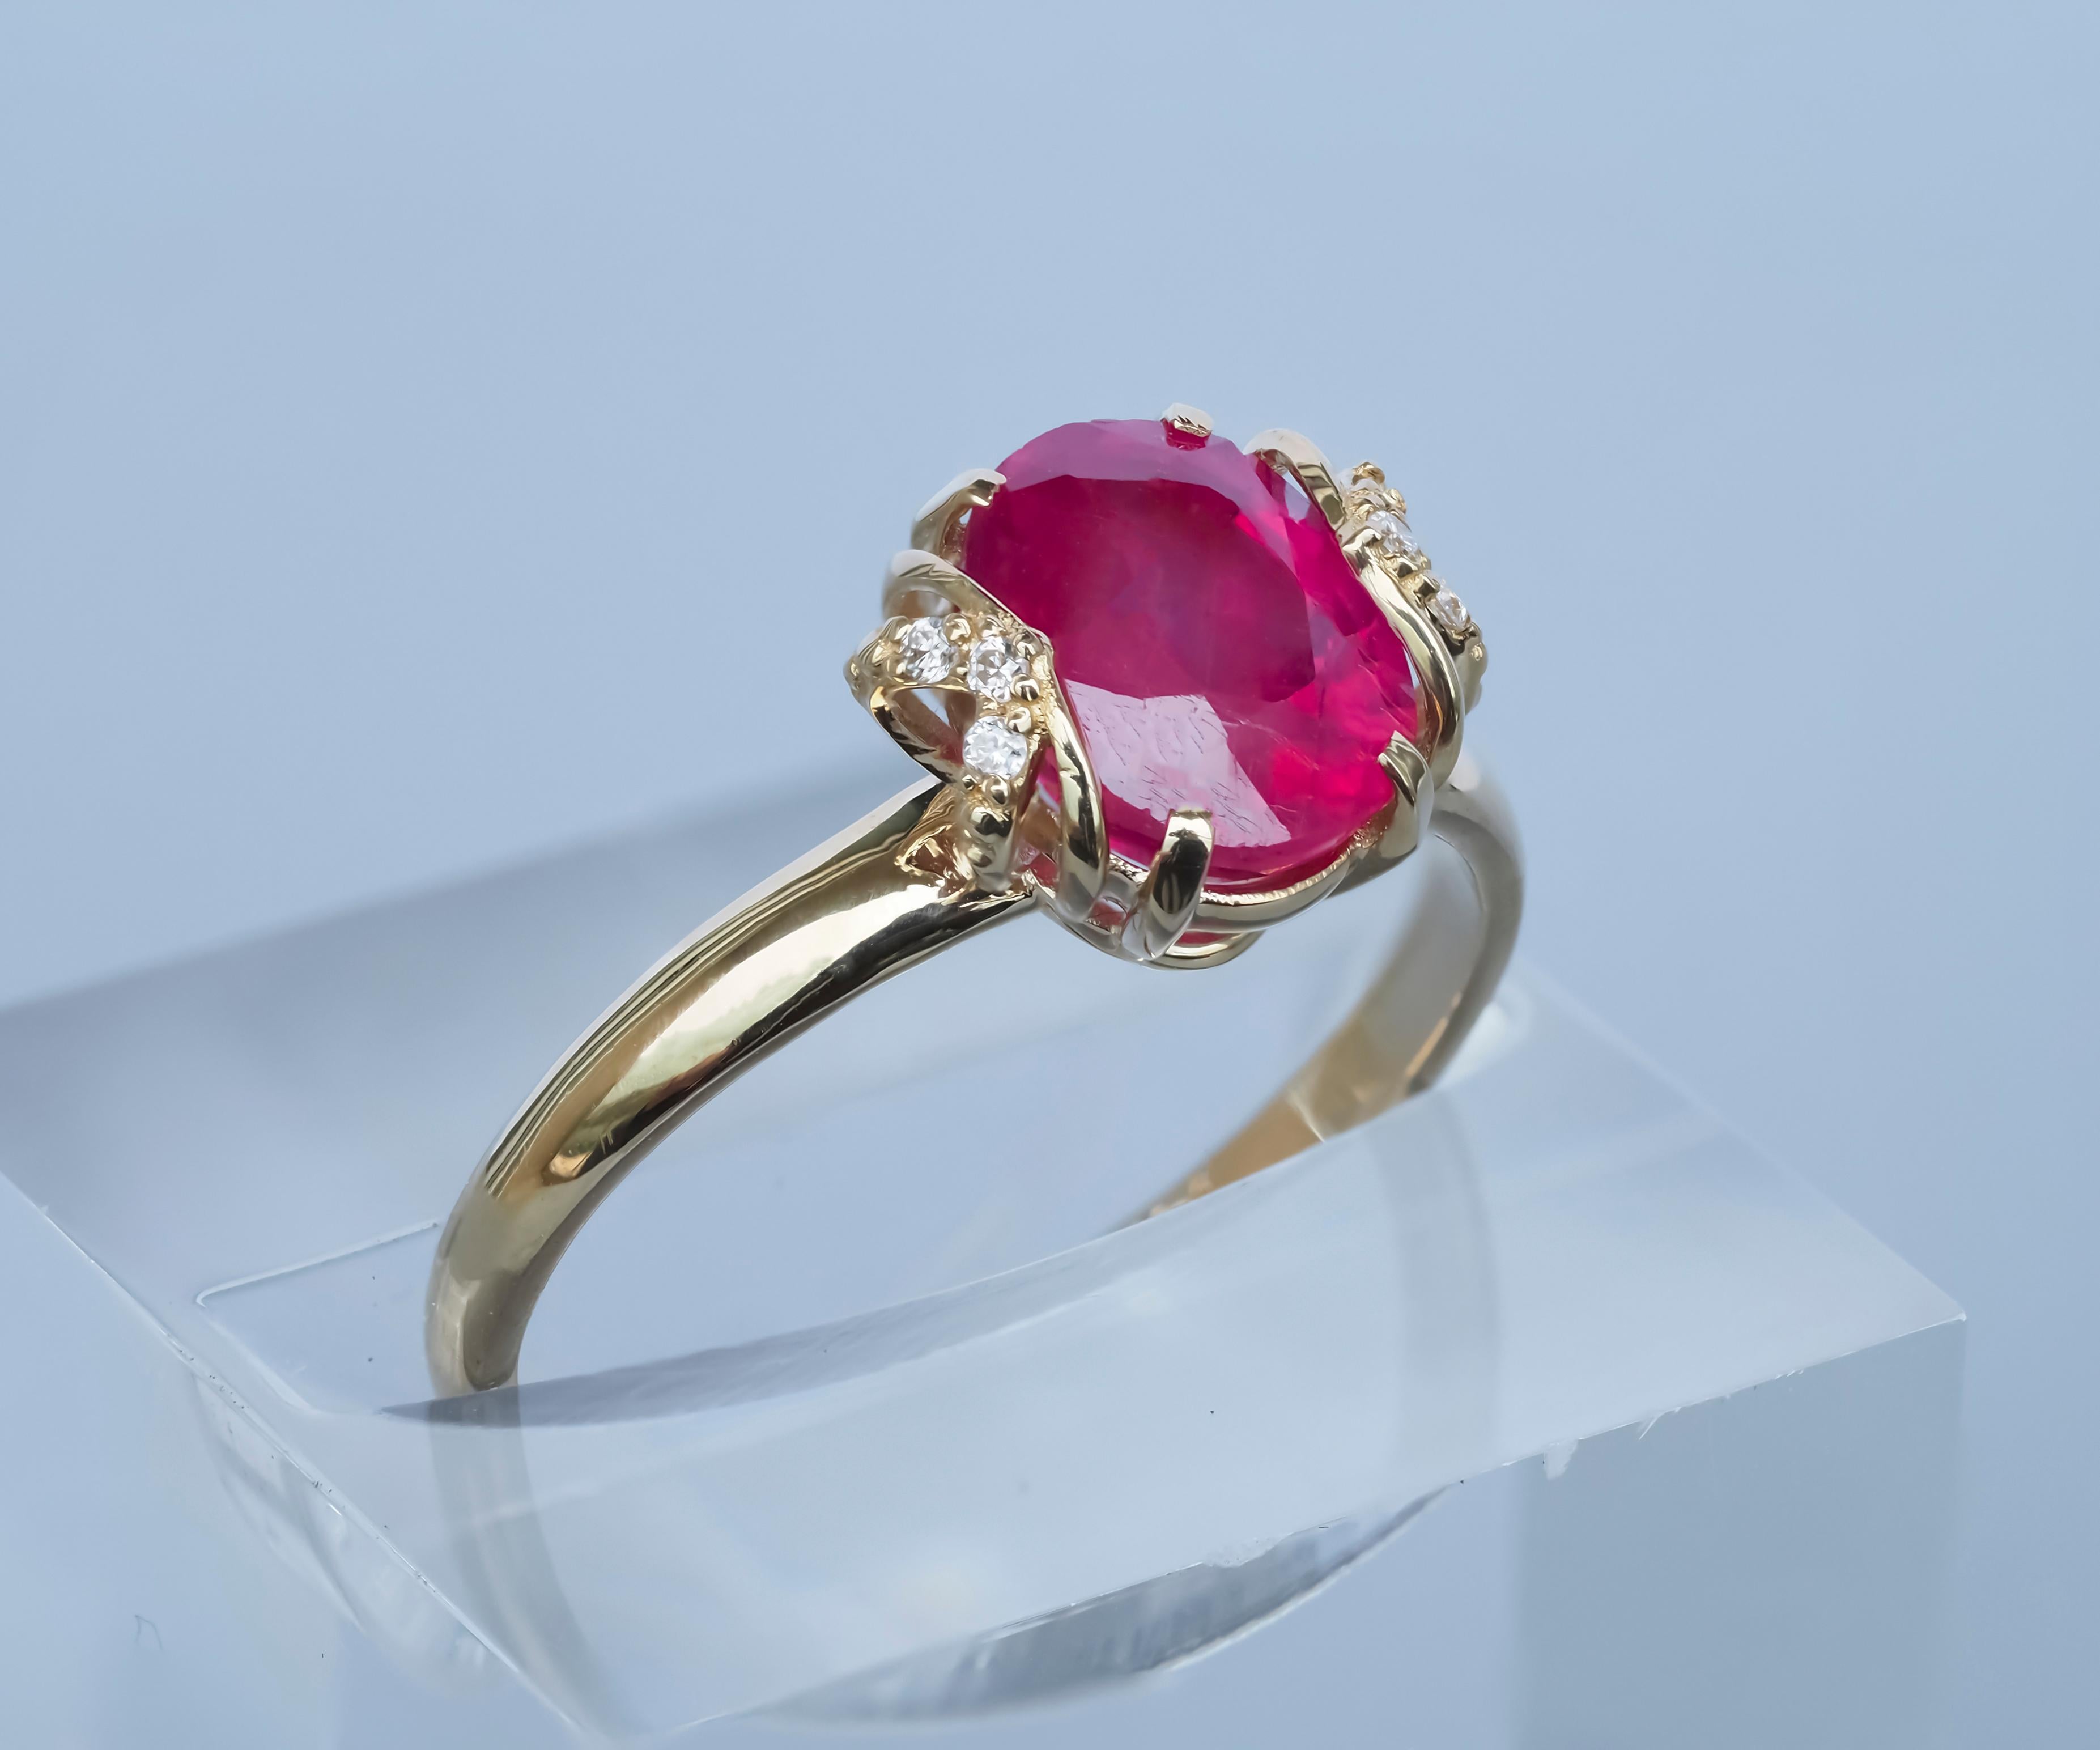 14 Karat Gold Ring with Ruby and Diamonds, Oval Ruby Ring 5